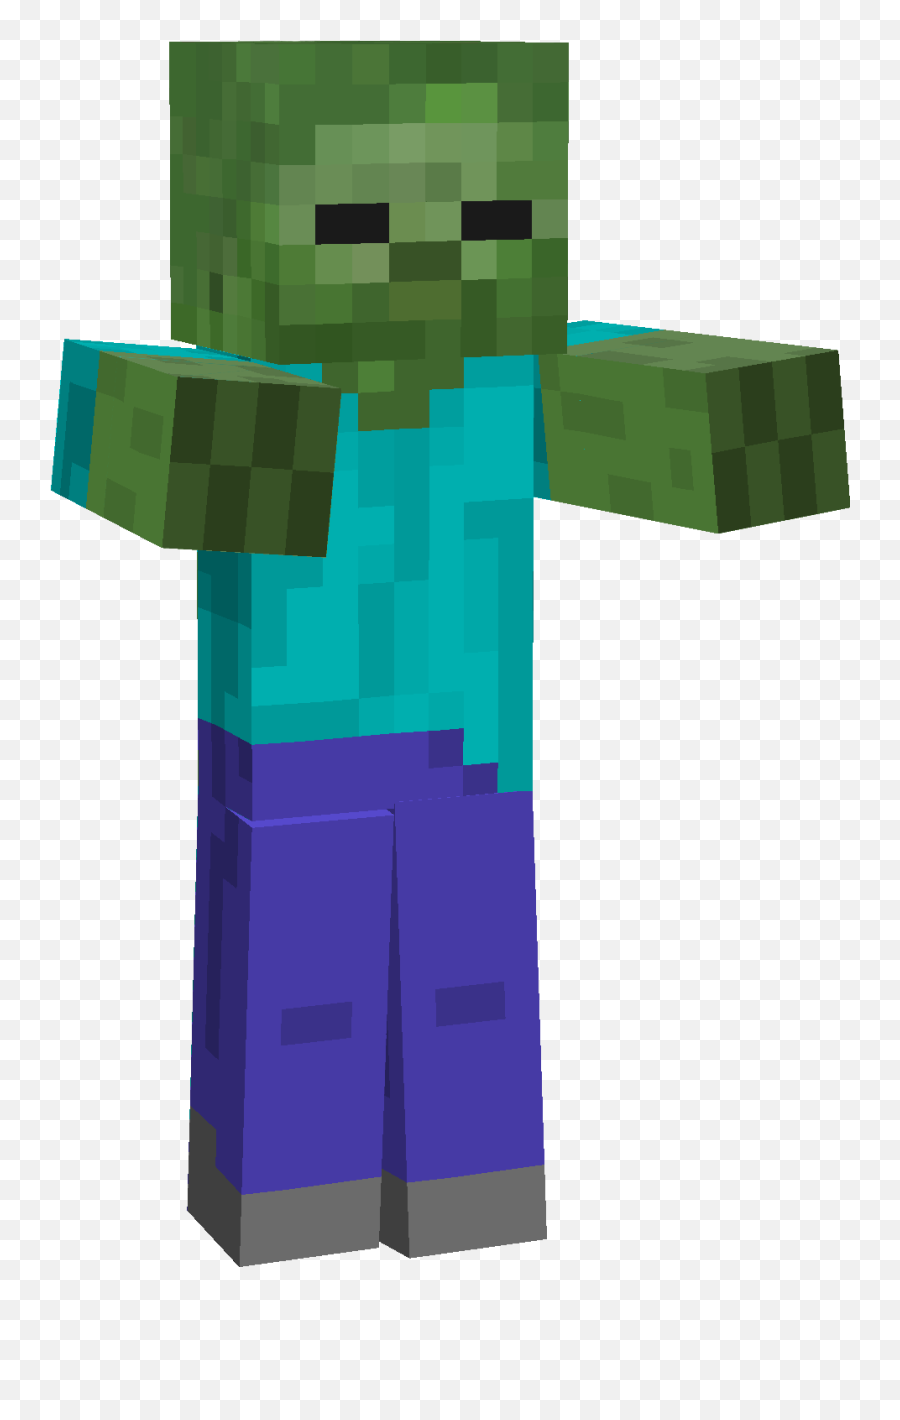 Minecraft Zombie Png - Minecraft Zombie,Minecraft Tree Png